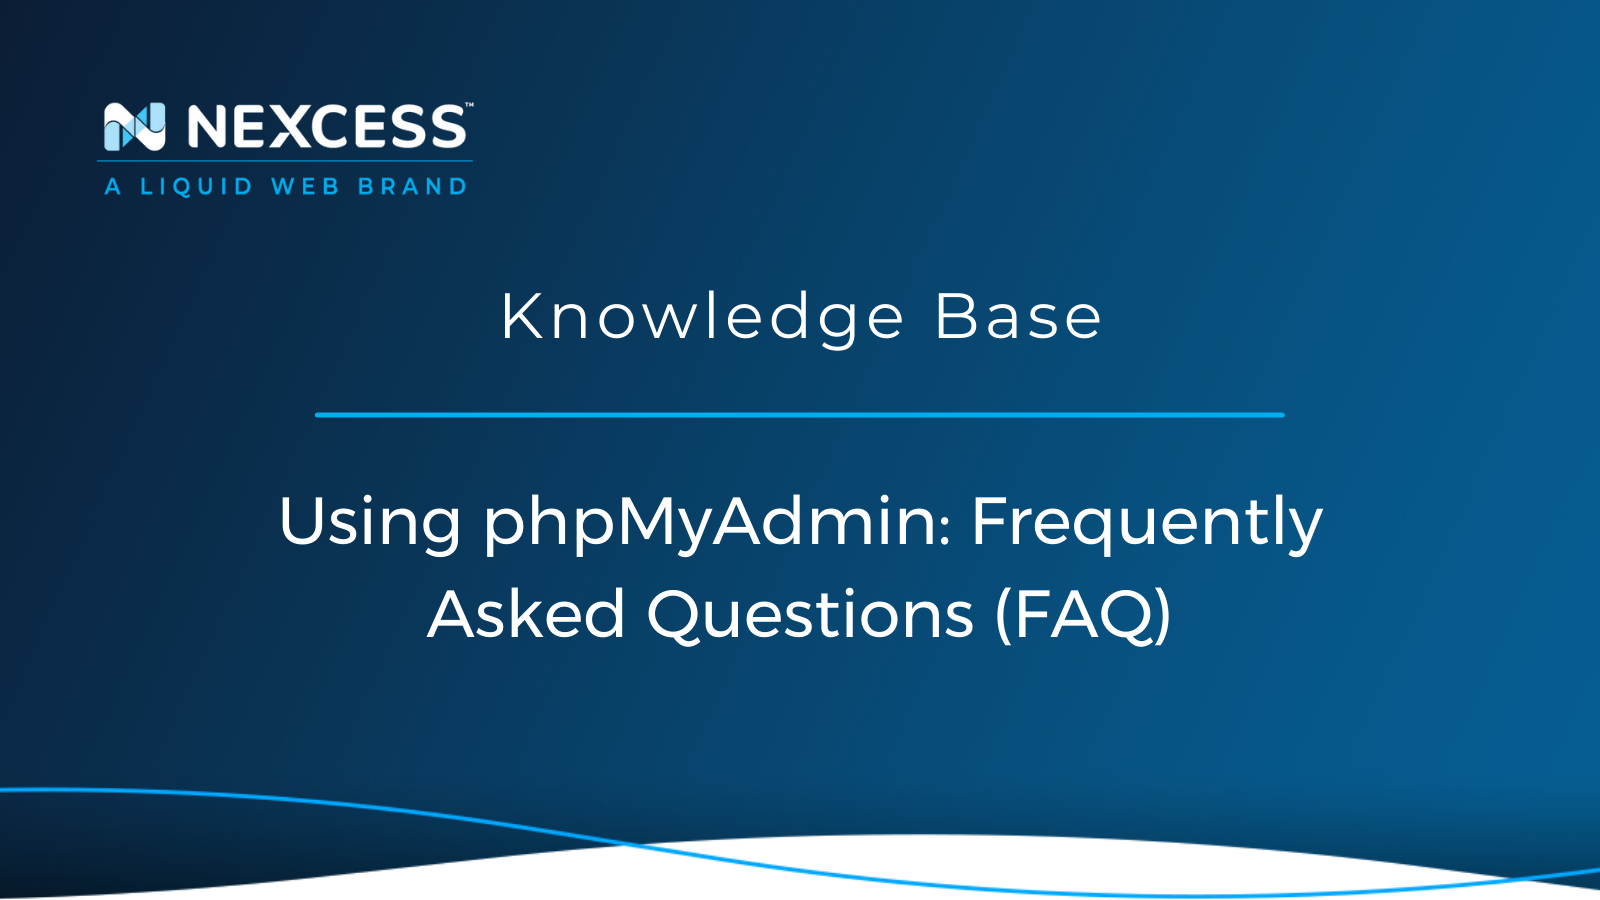 Using phpMyAdmin: Frequently Asked Questions (FAQ)